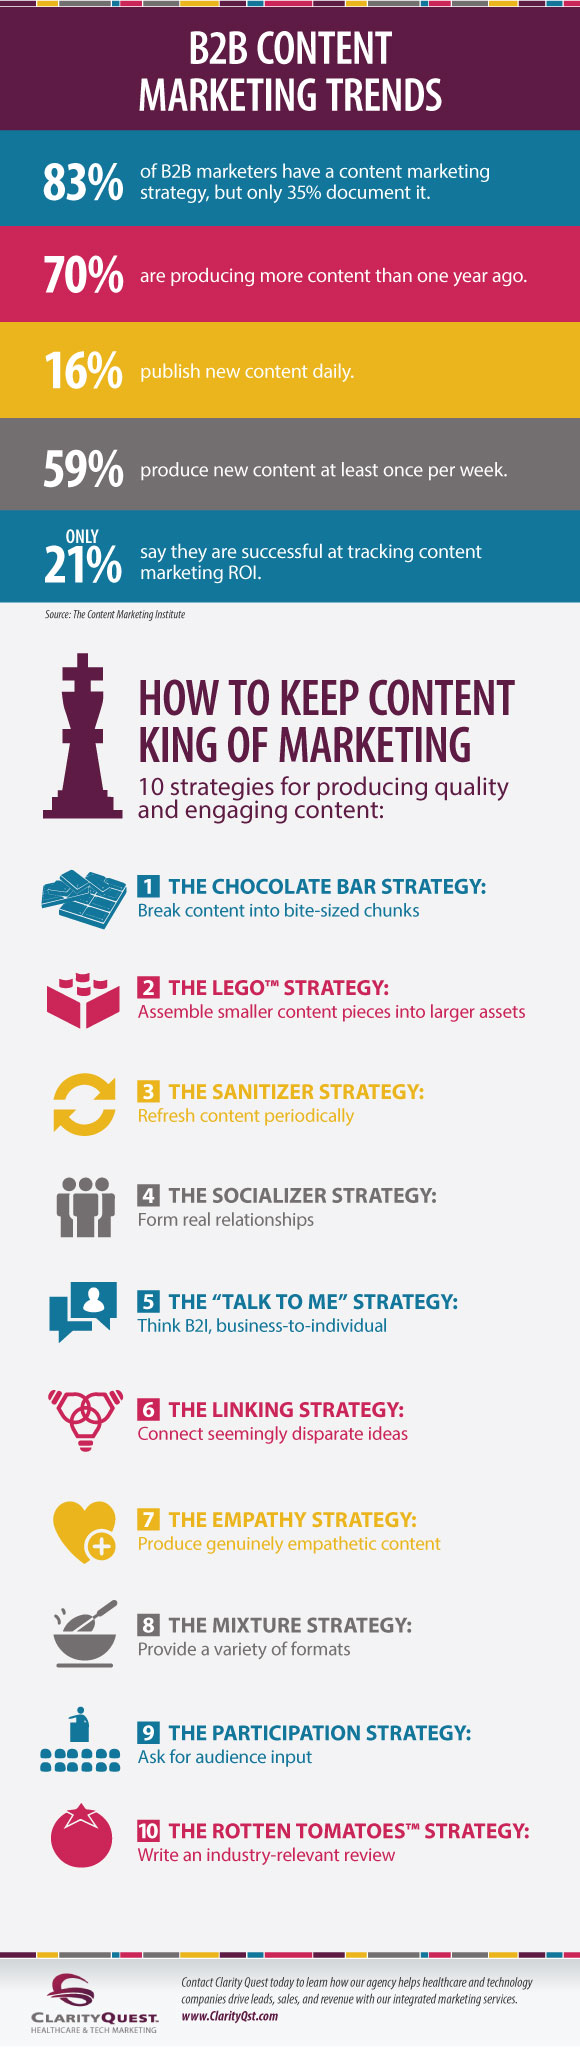 Content Marketing Trends Infographic